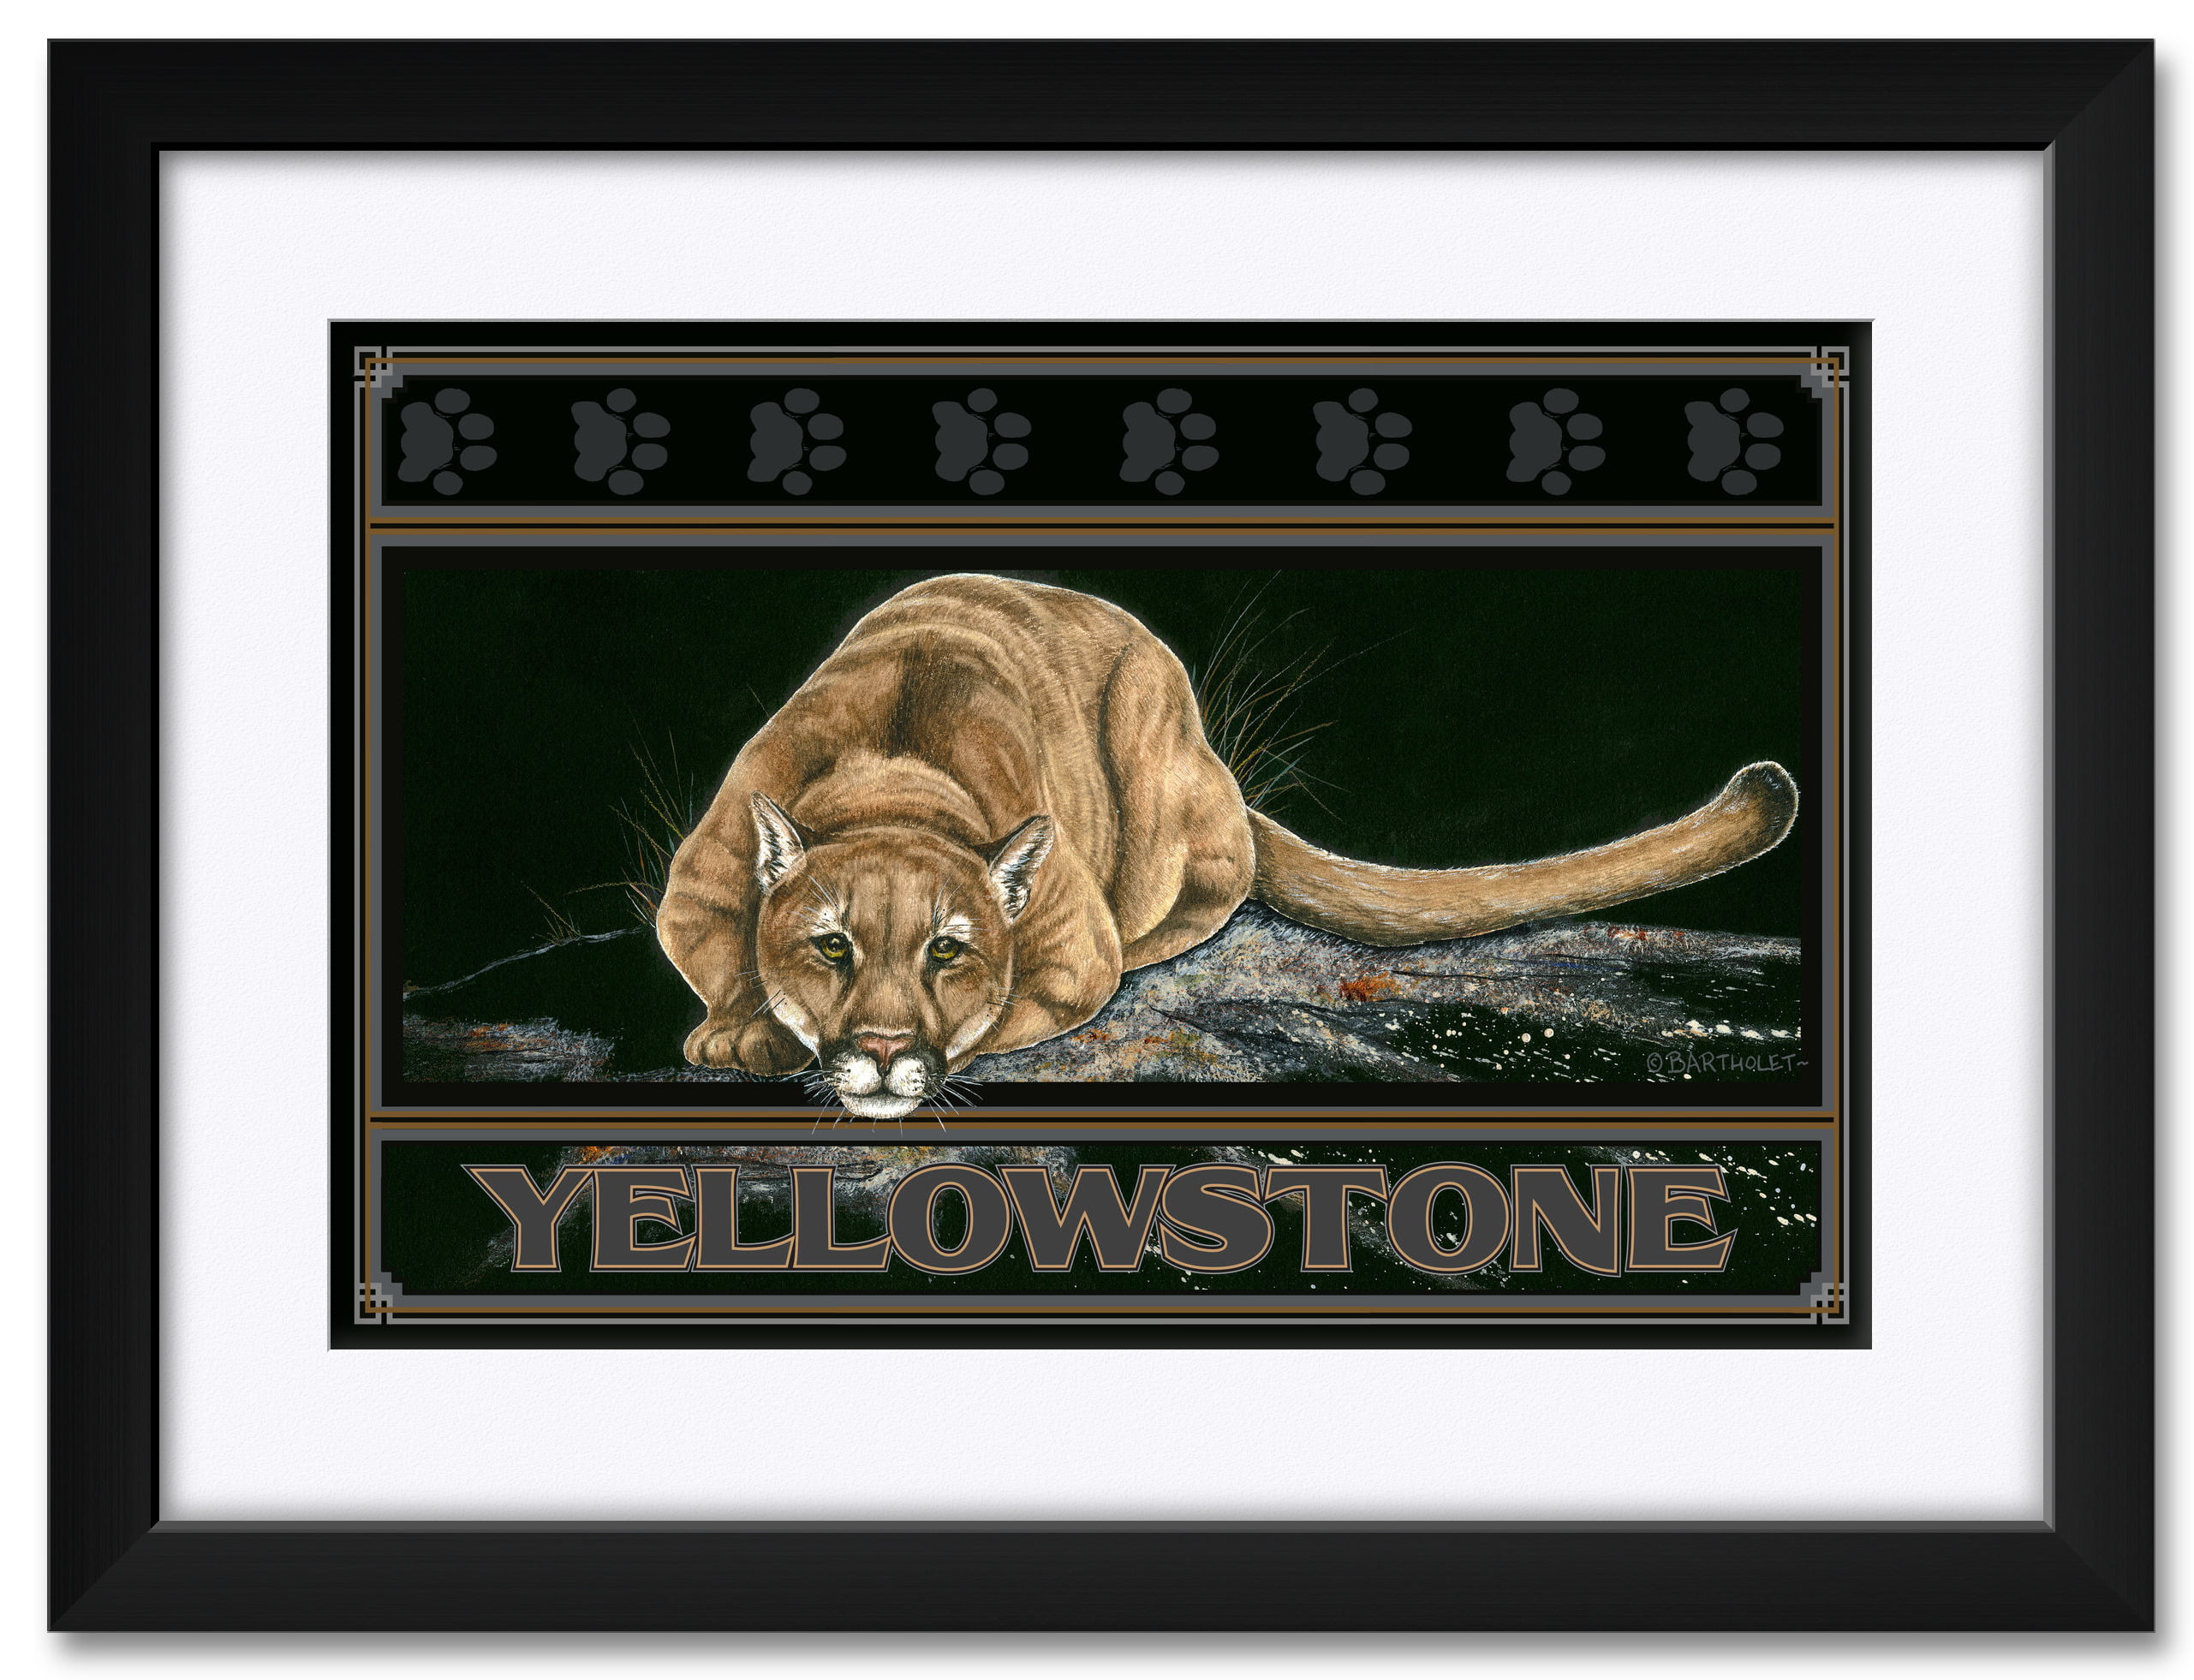 Silent Night Cougar Yellowstone National Park Giclee Art Print Poster from Original Watercolor by Artist Dave Bartholet